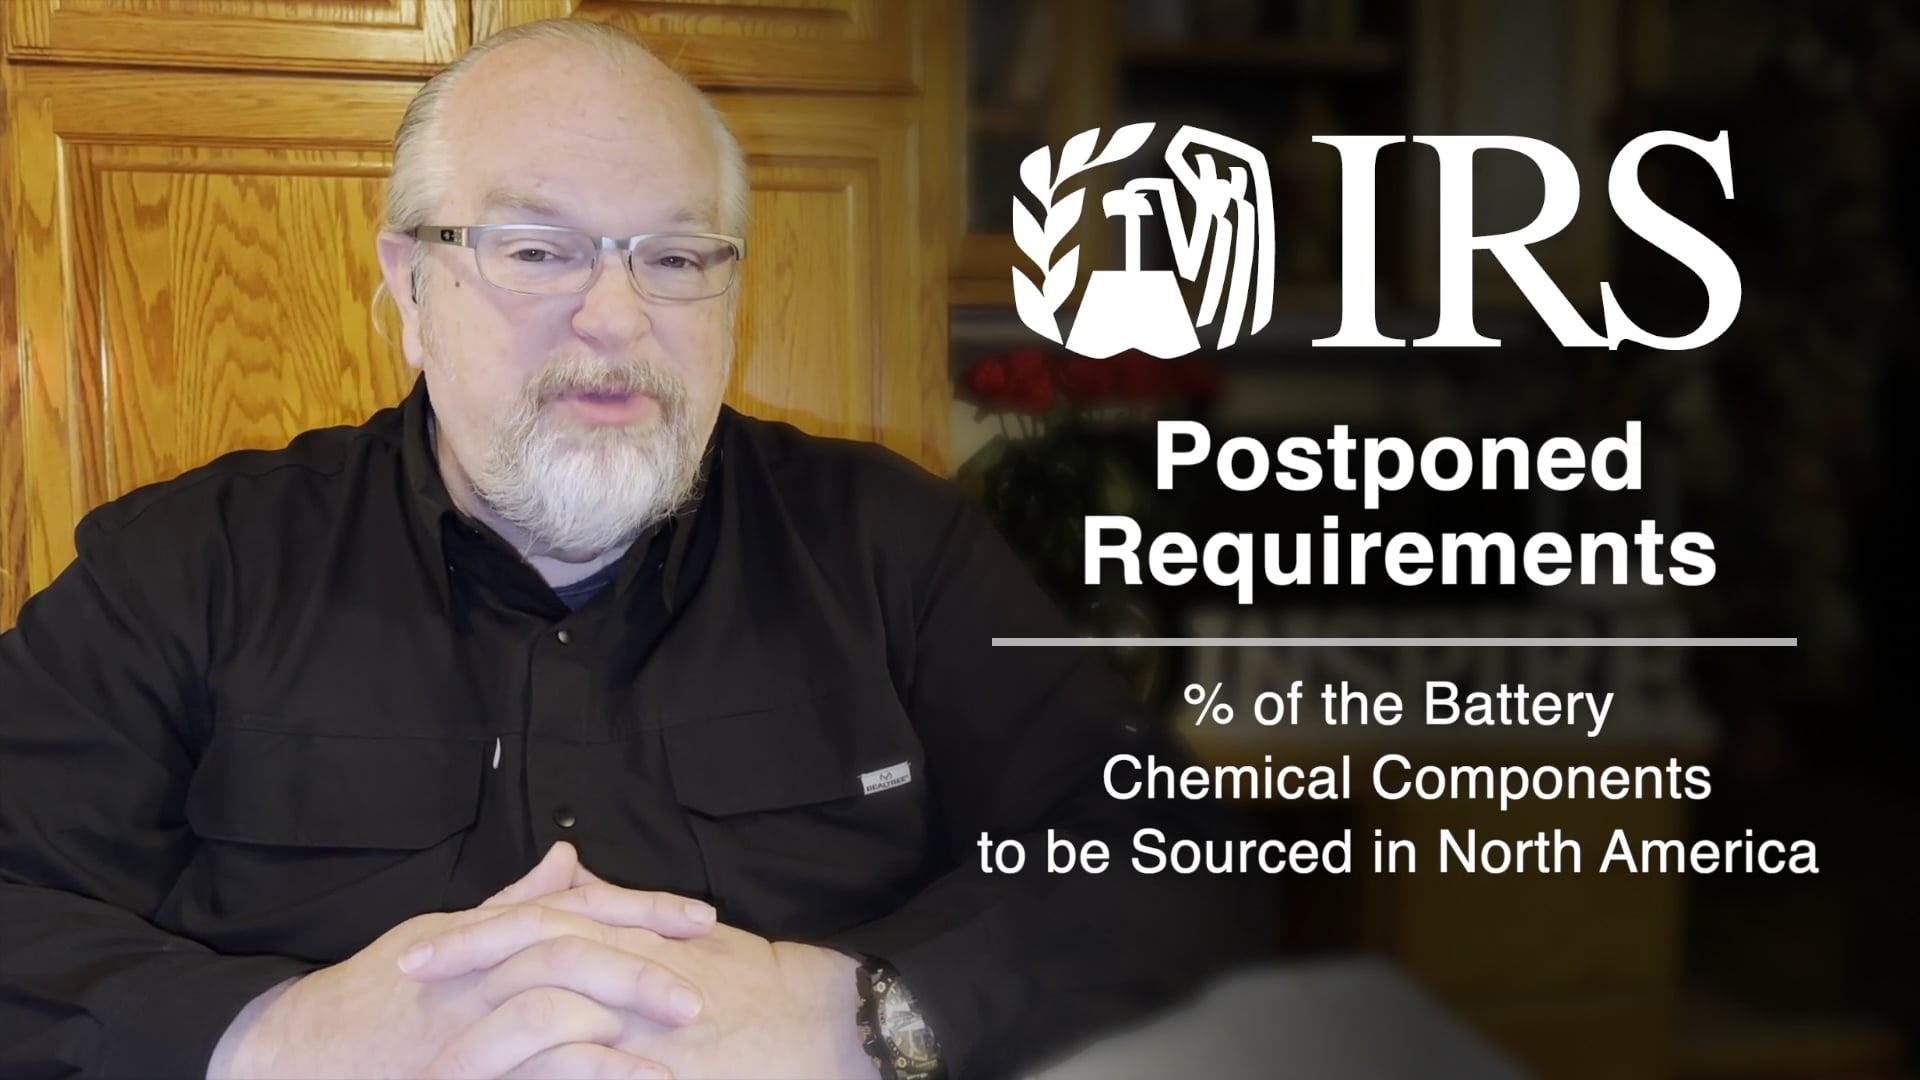 irs-electric-vehicle-requirement-postponed-on-vimeo